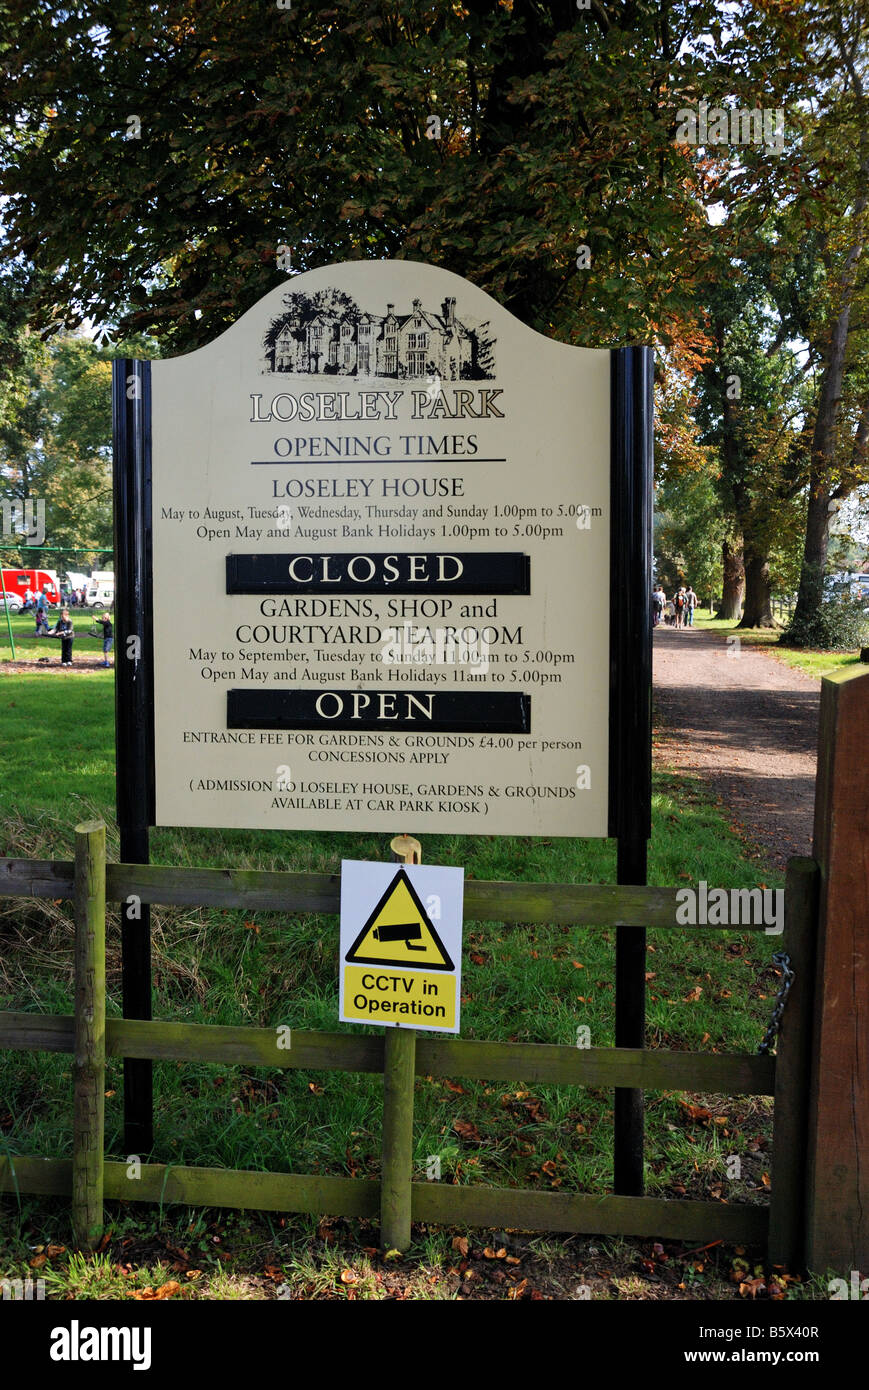 Signboard for Loseley Park at Loseley Park for opening times entrance fee and CCTV is in operation LOSELEY PARK BUILT IN 1562 Stock Photo